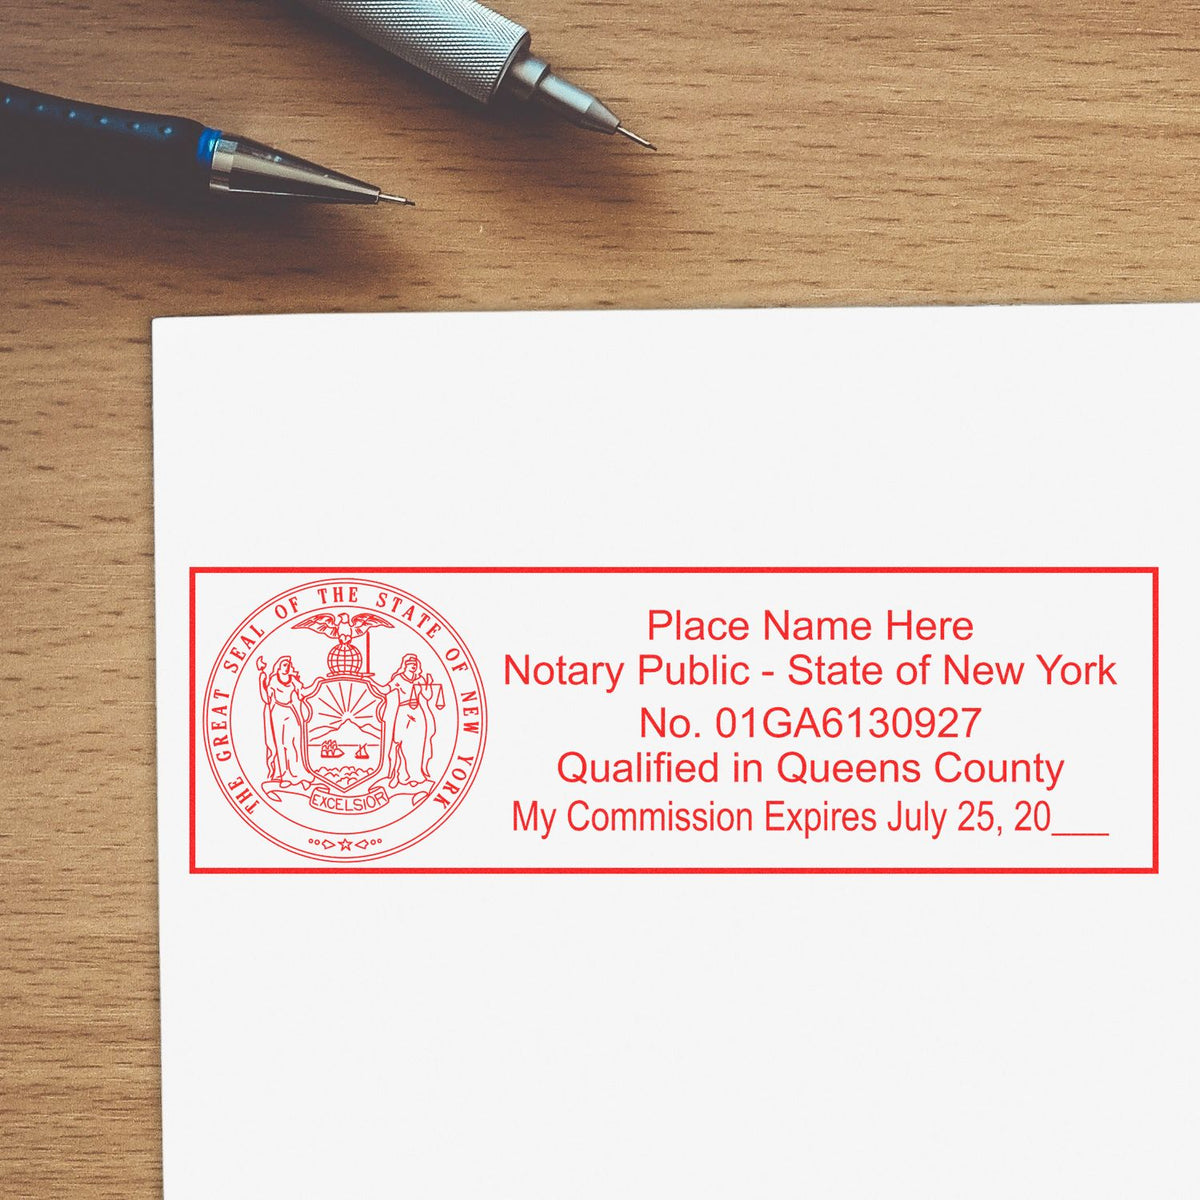 The Self-Inking State Seal New York Notary Stamp stamp impression comes to life with a crisp, detailed photo on paper - showcasing true professional quality.